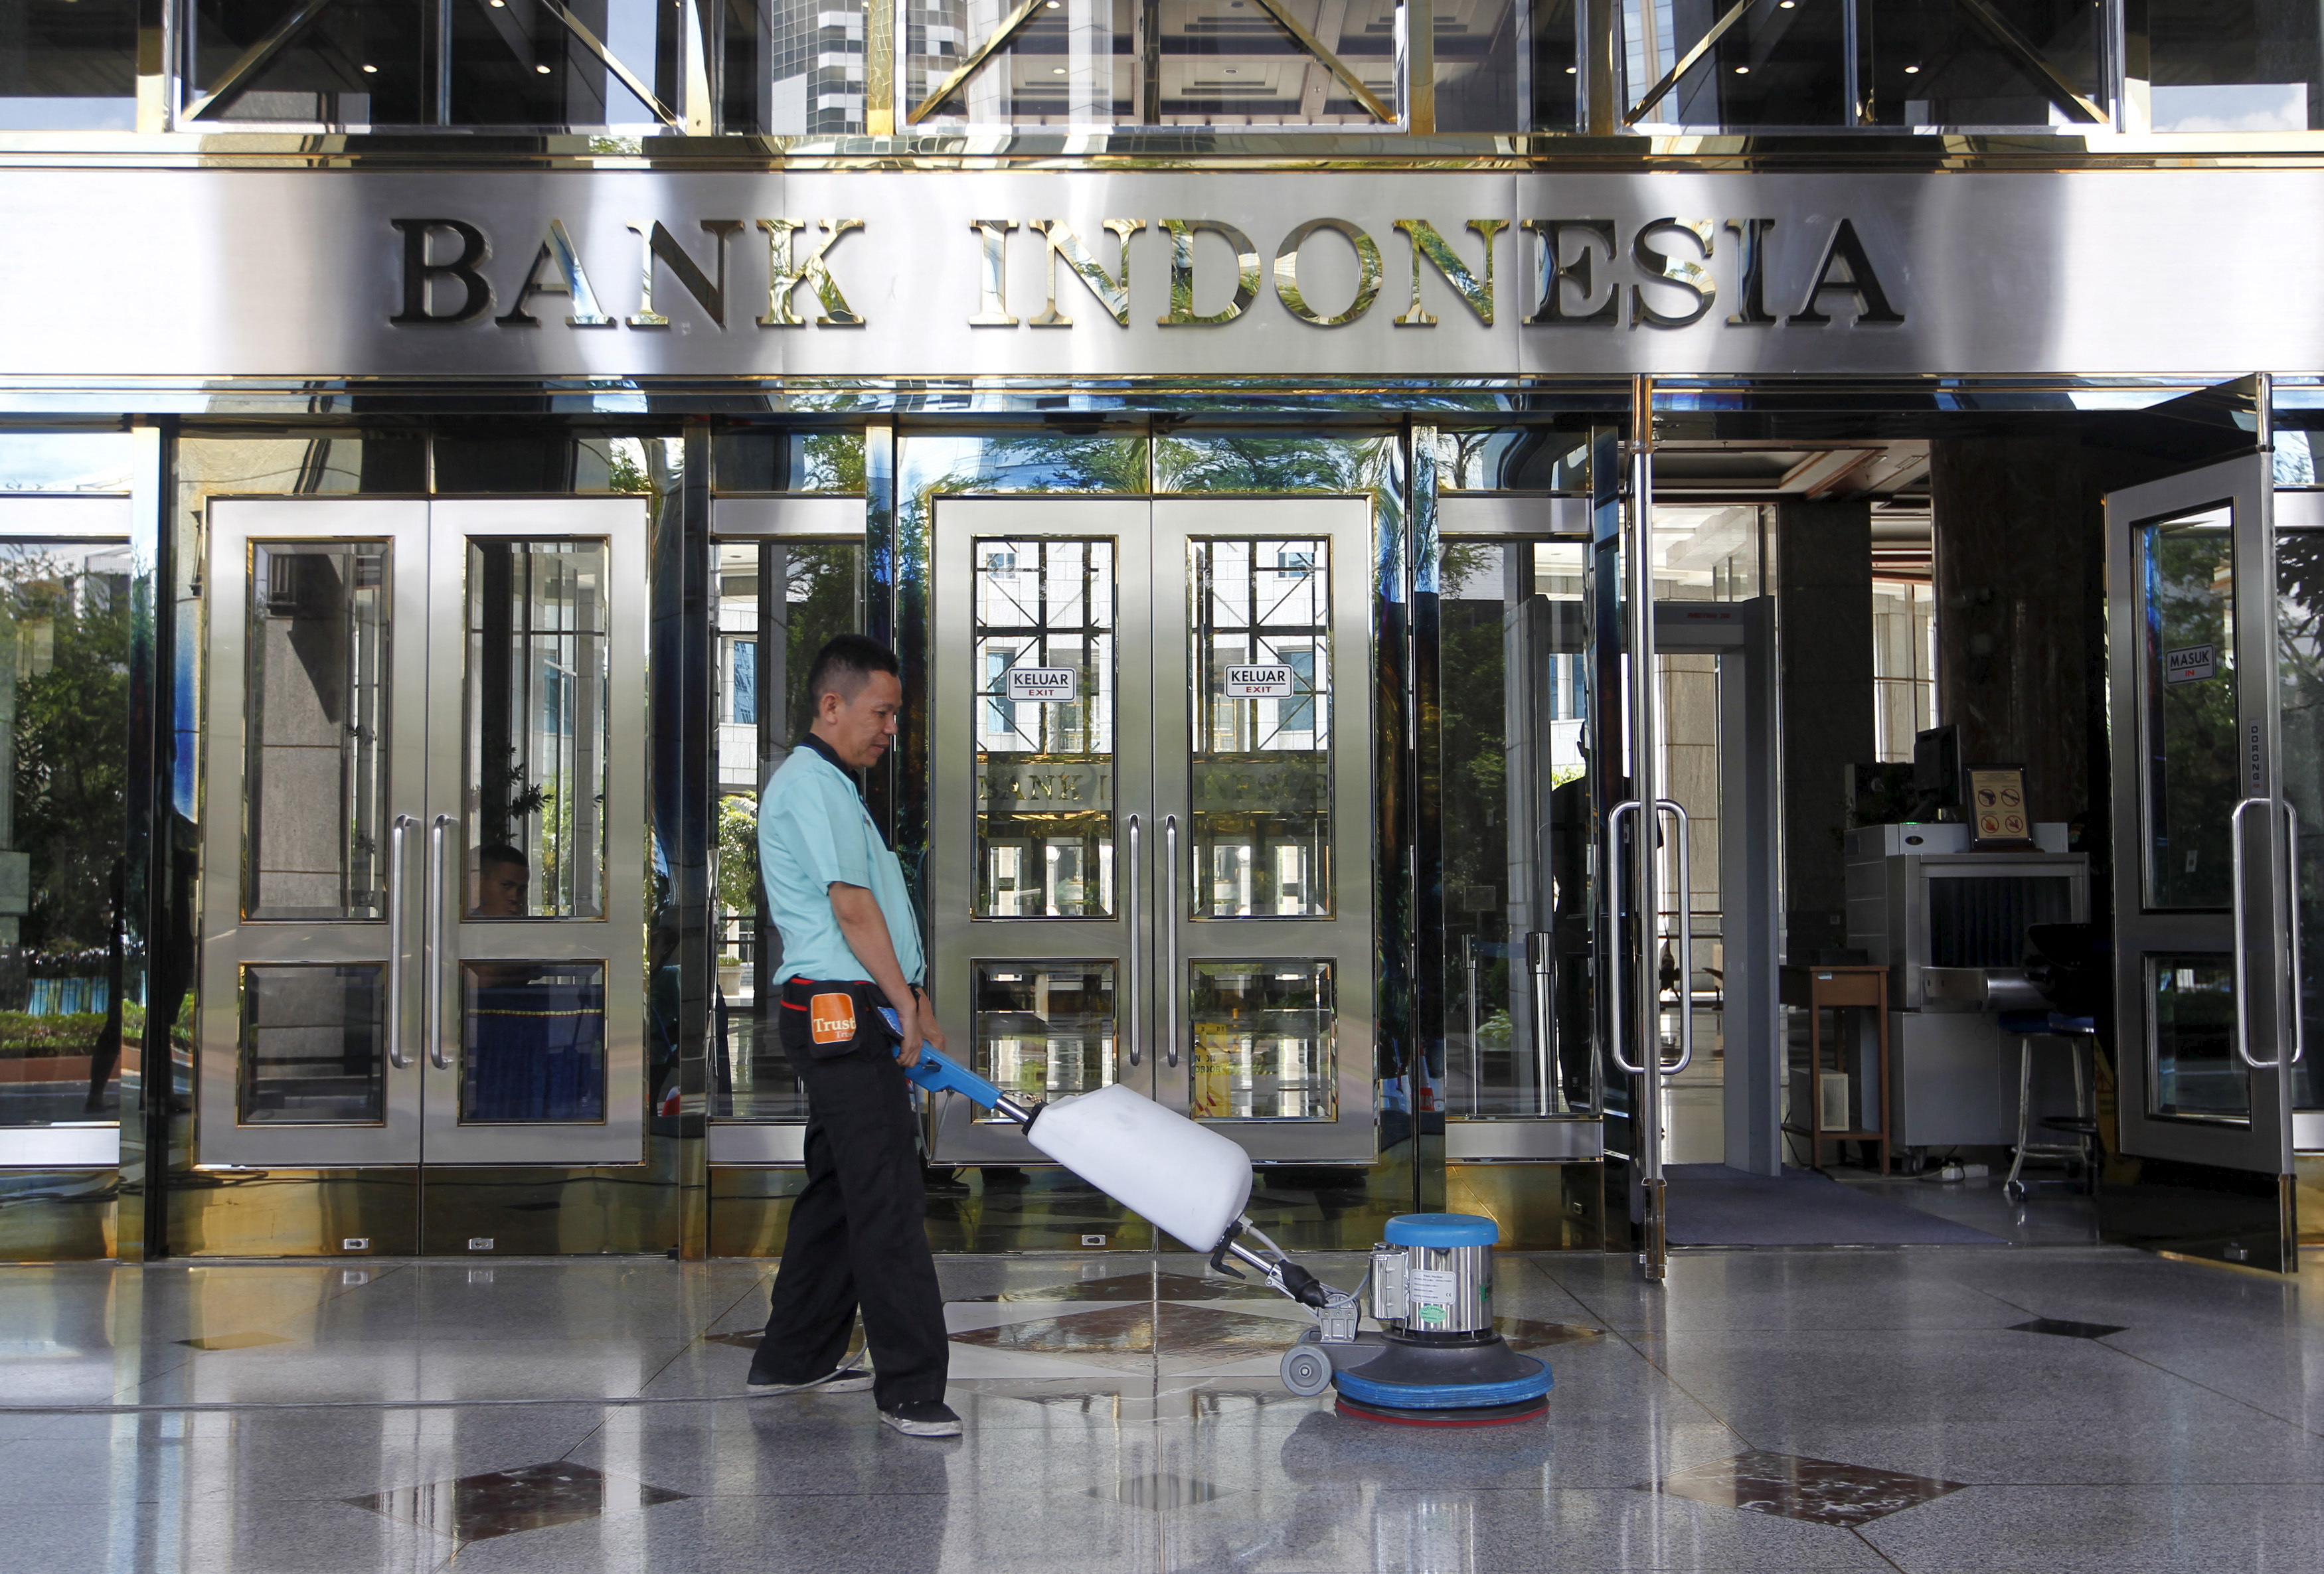 A worker cleans near the front entrance of the Bank Indonesia's headquarters in Jakarta, Indonesia